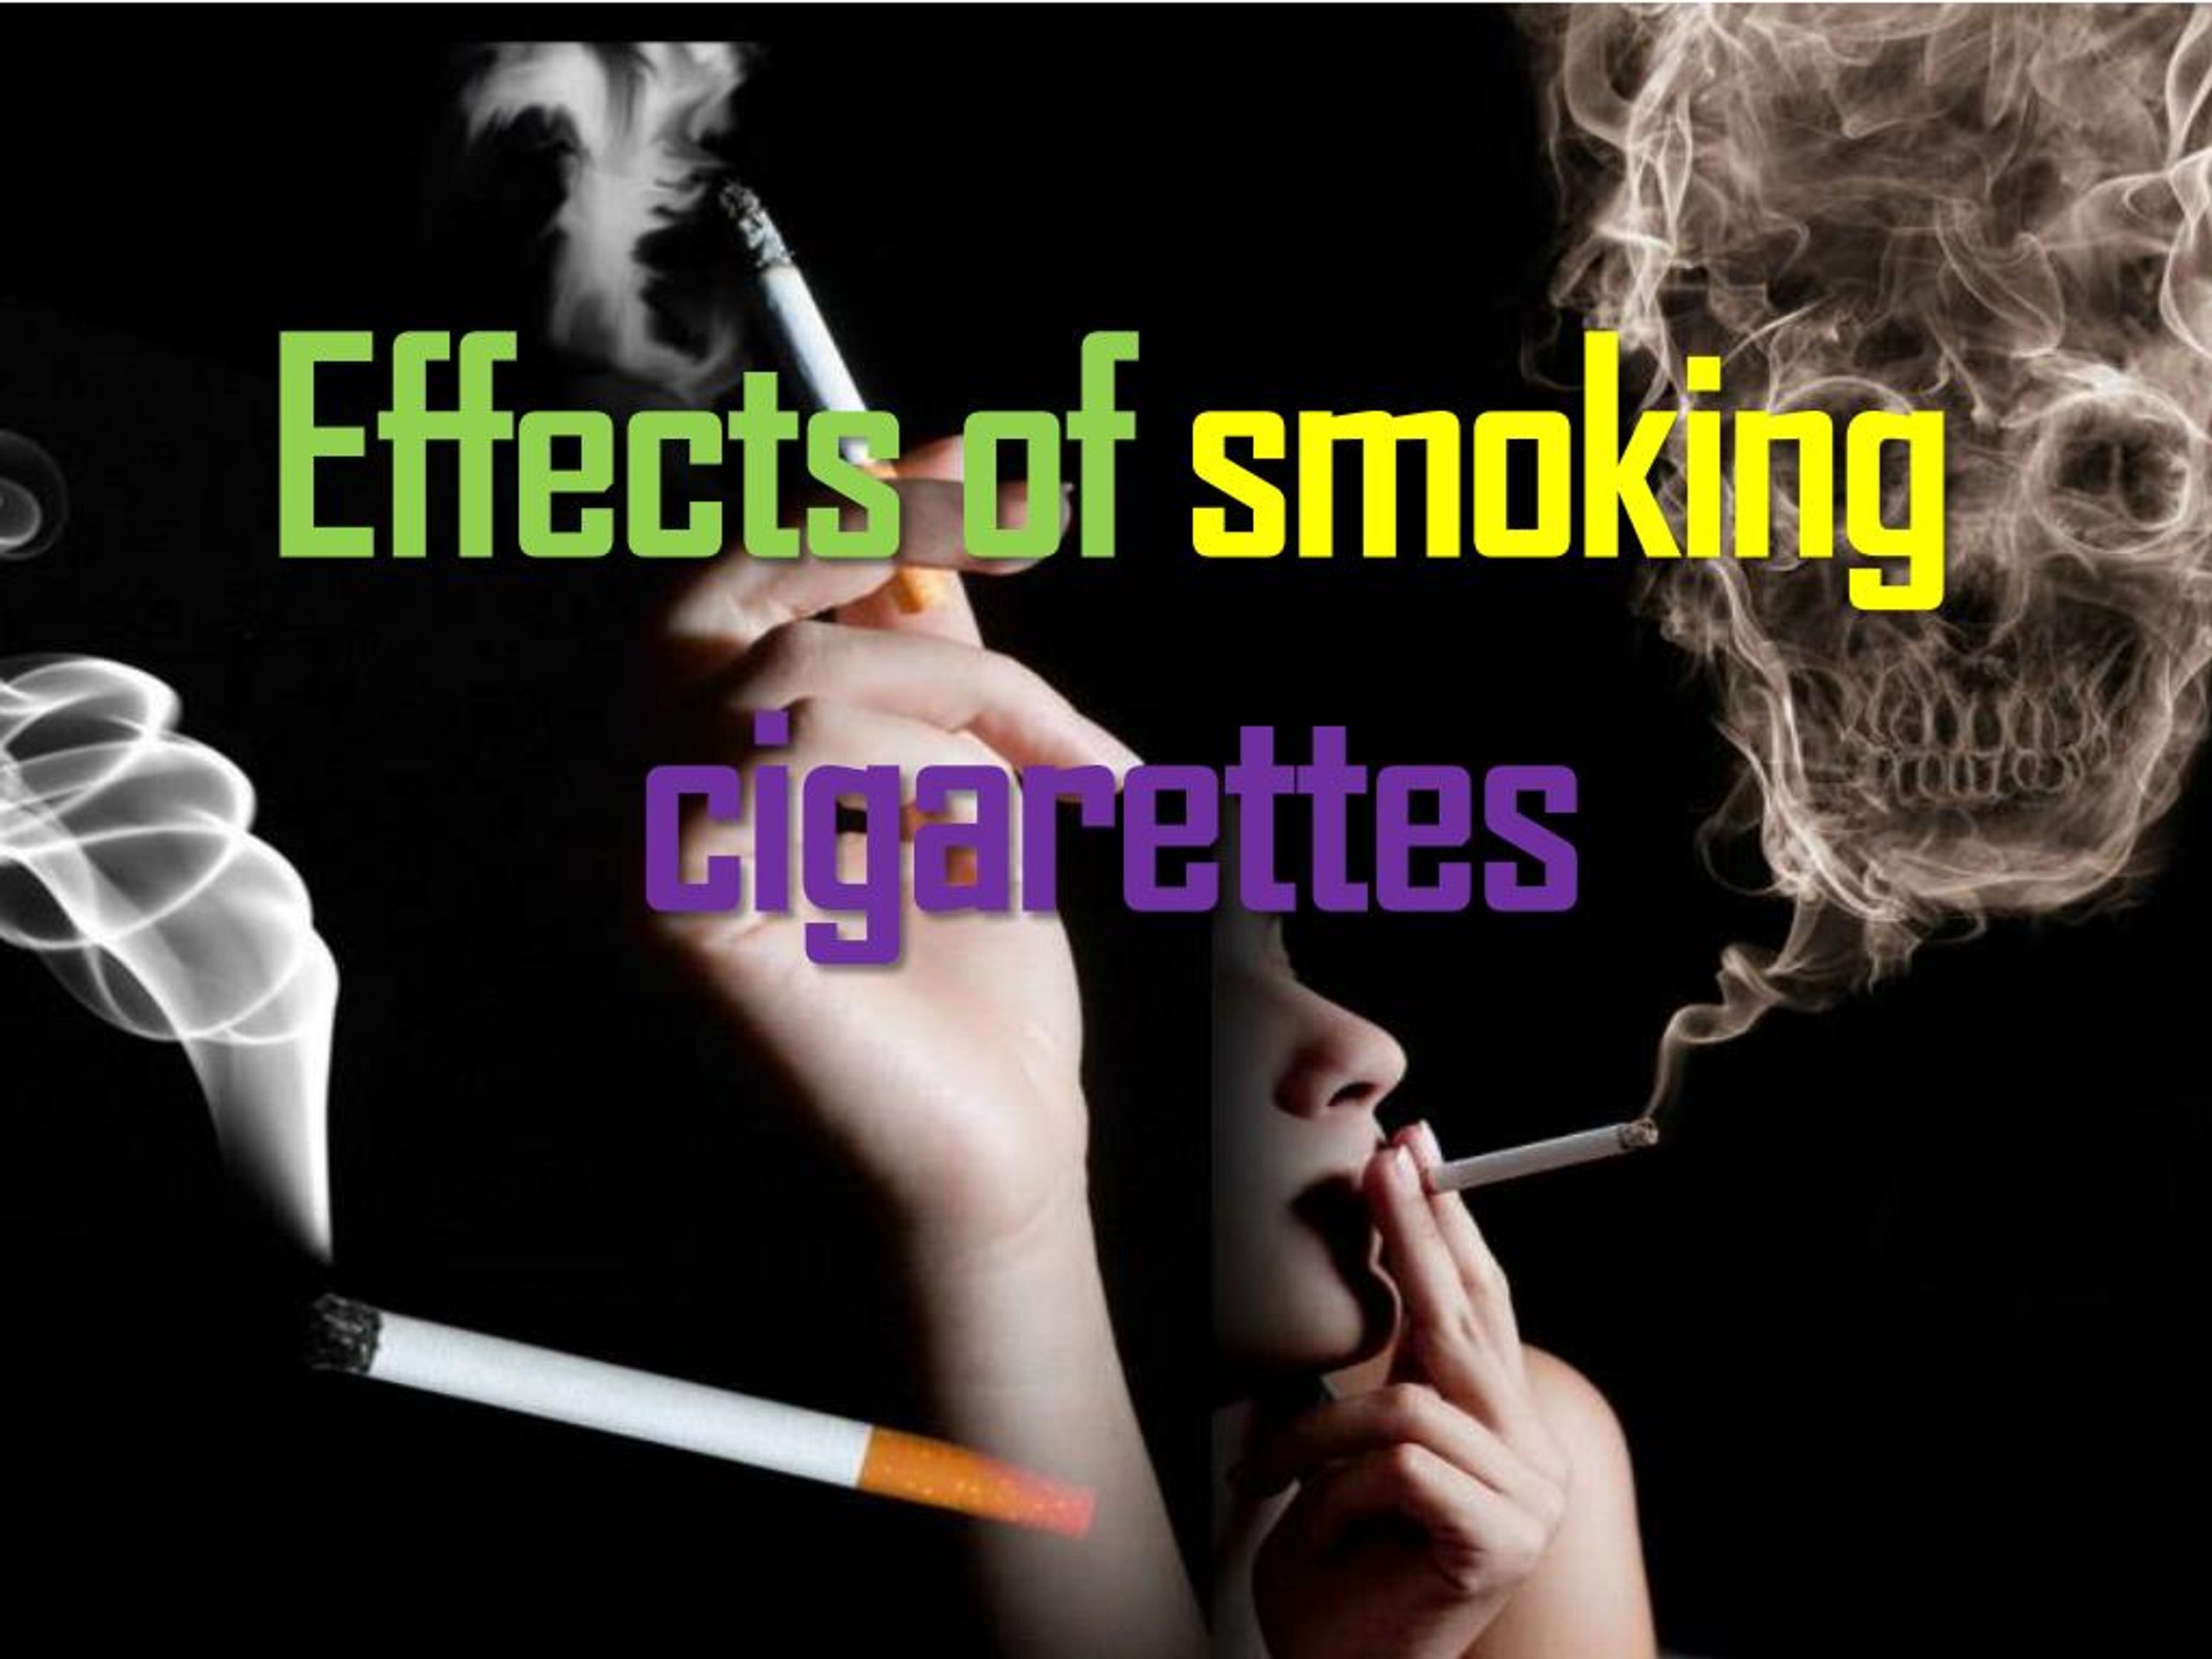 Is Smoking Cigarettes Bad For Women Sexual Health, Risk